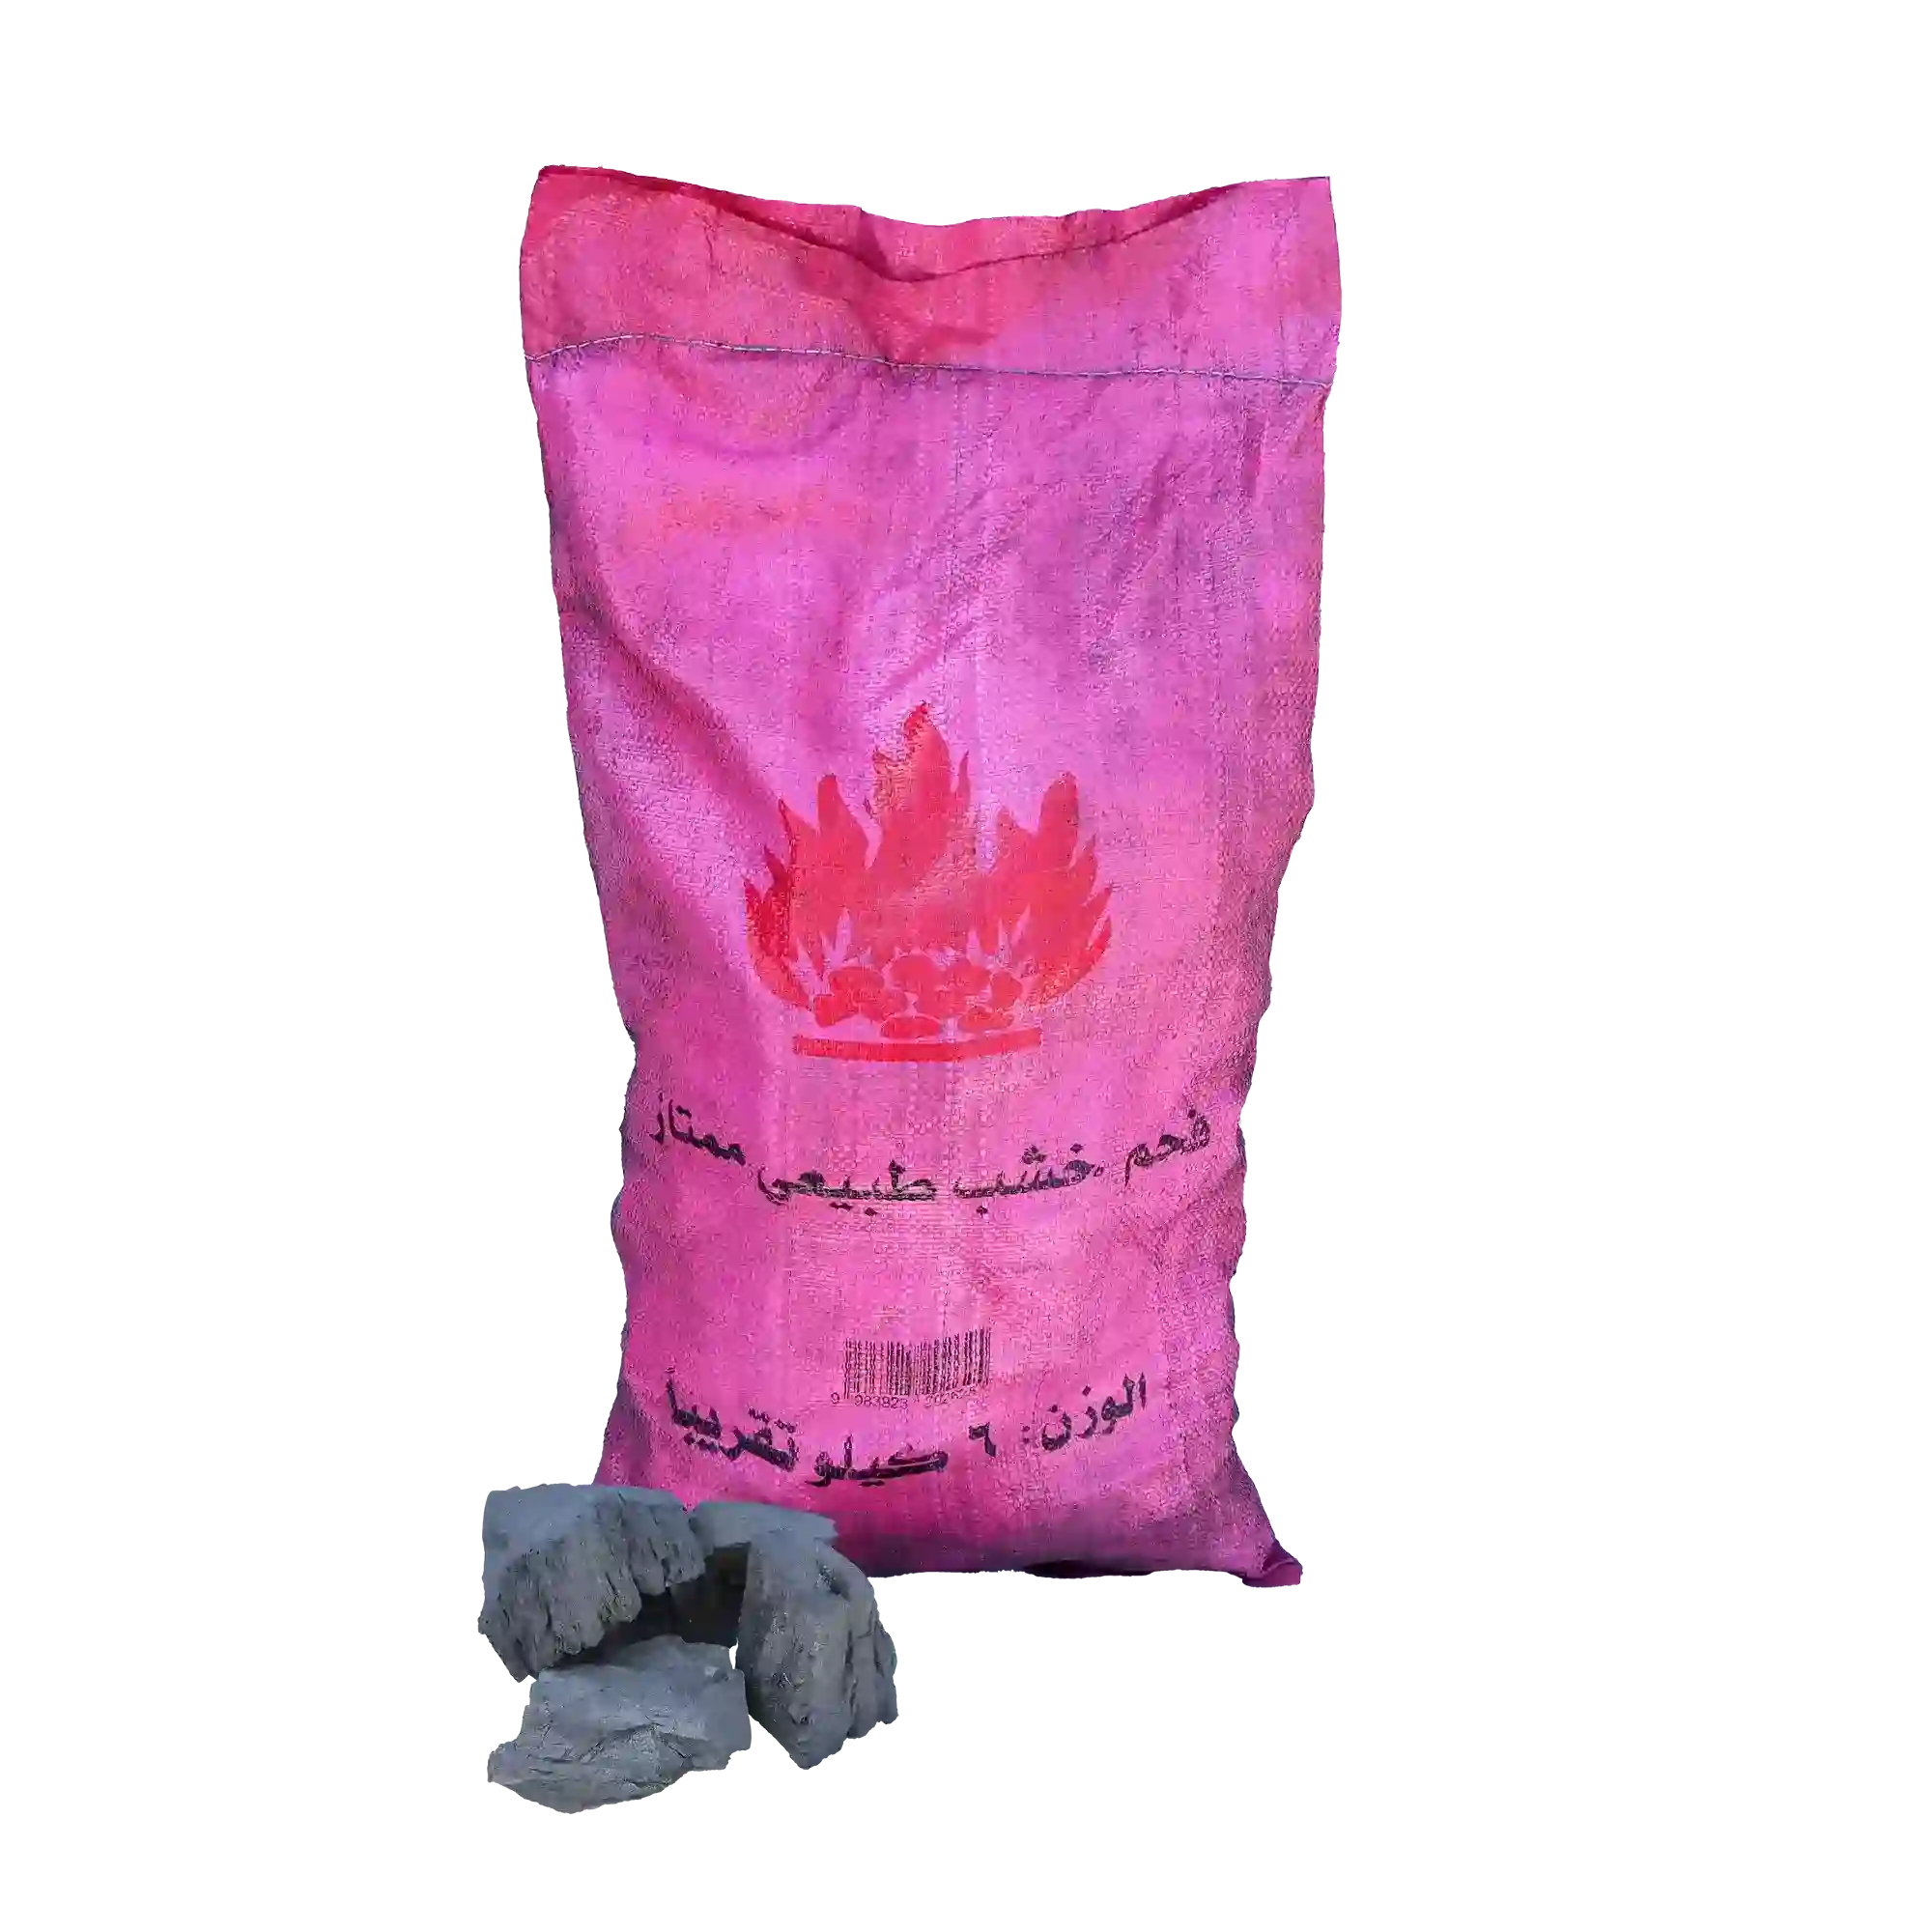 KAC - African charcoal (grilled) - 6 kg